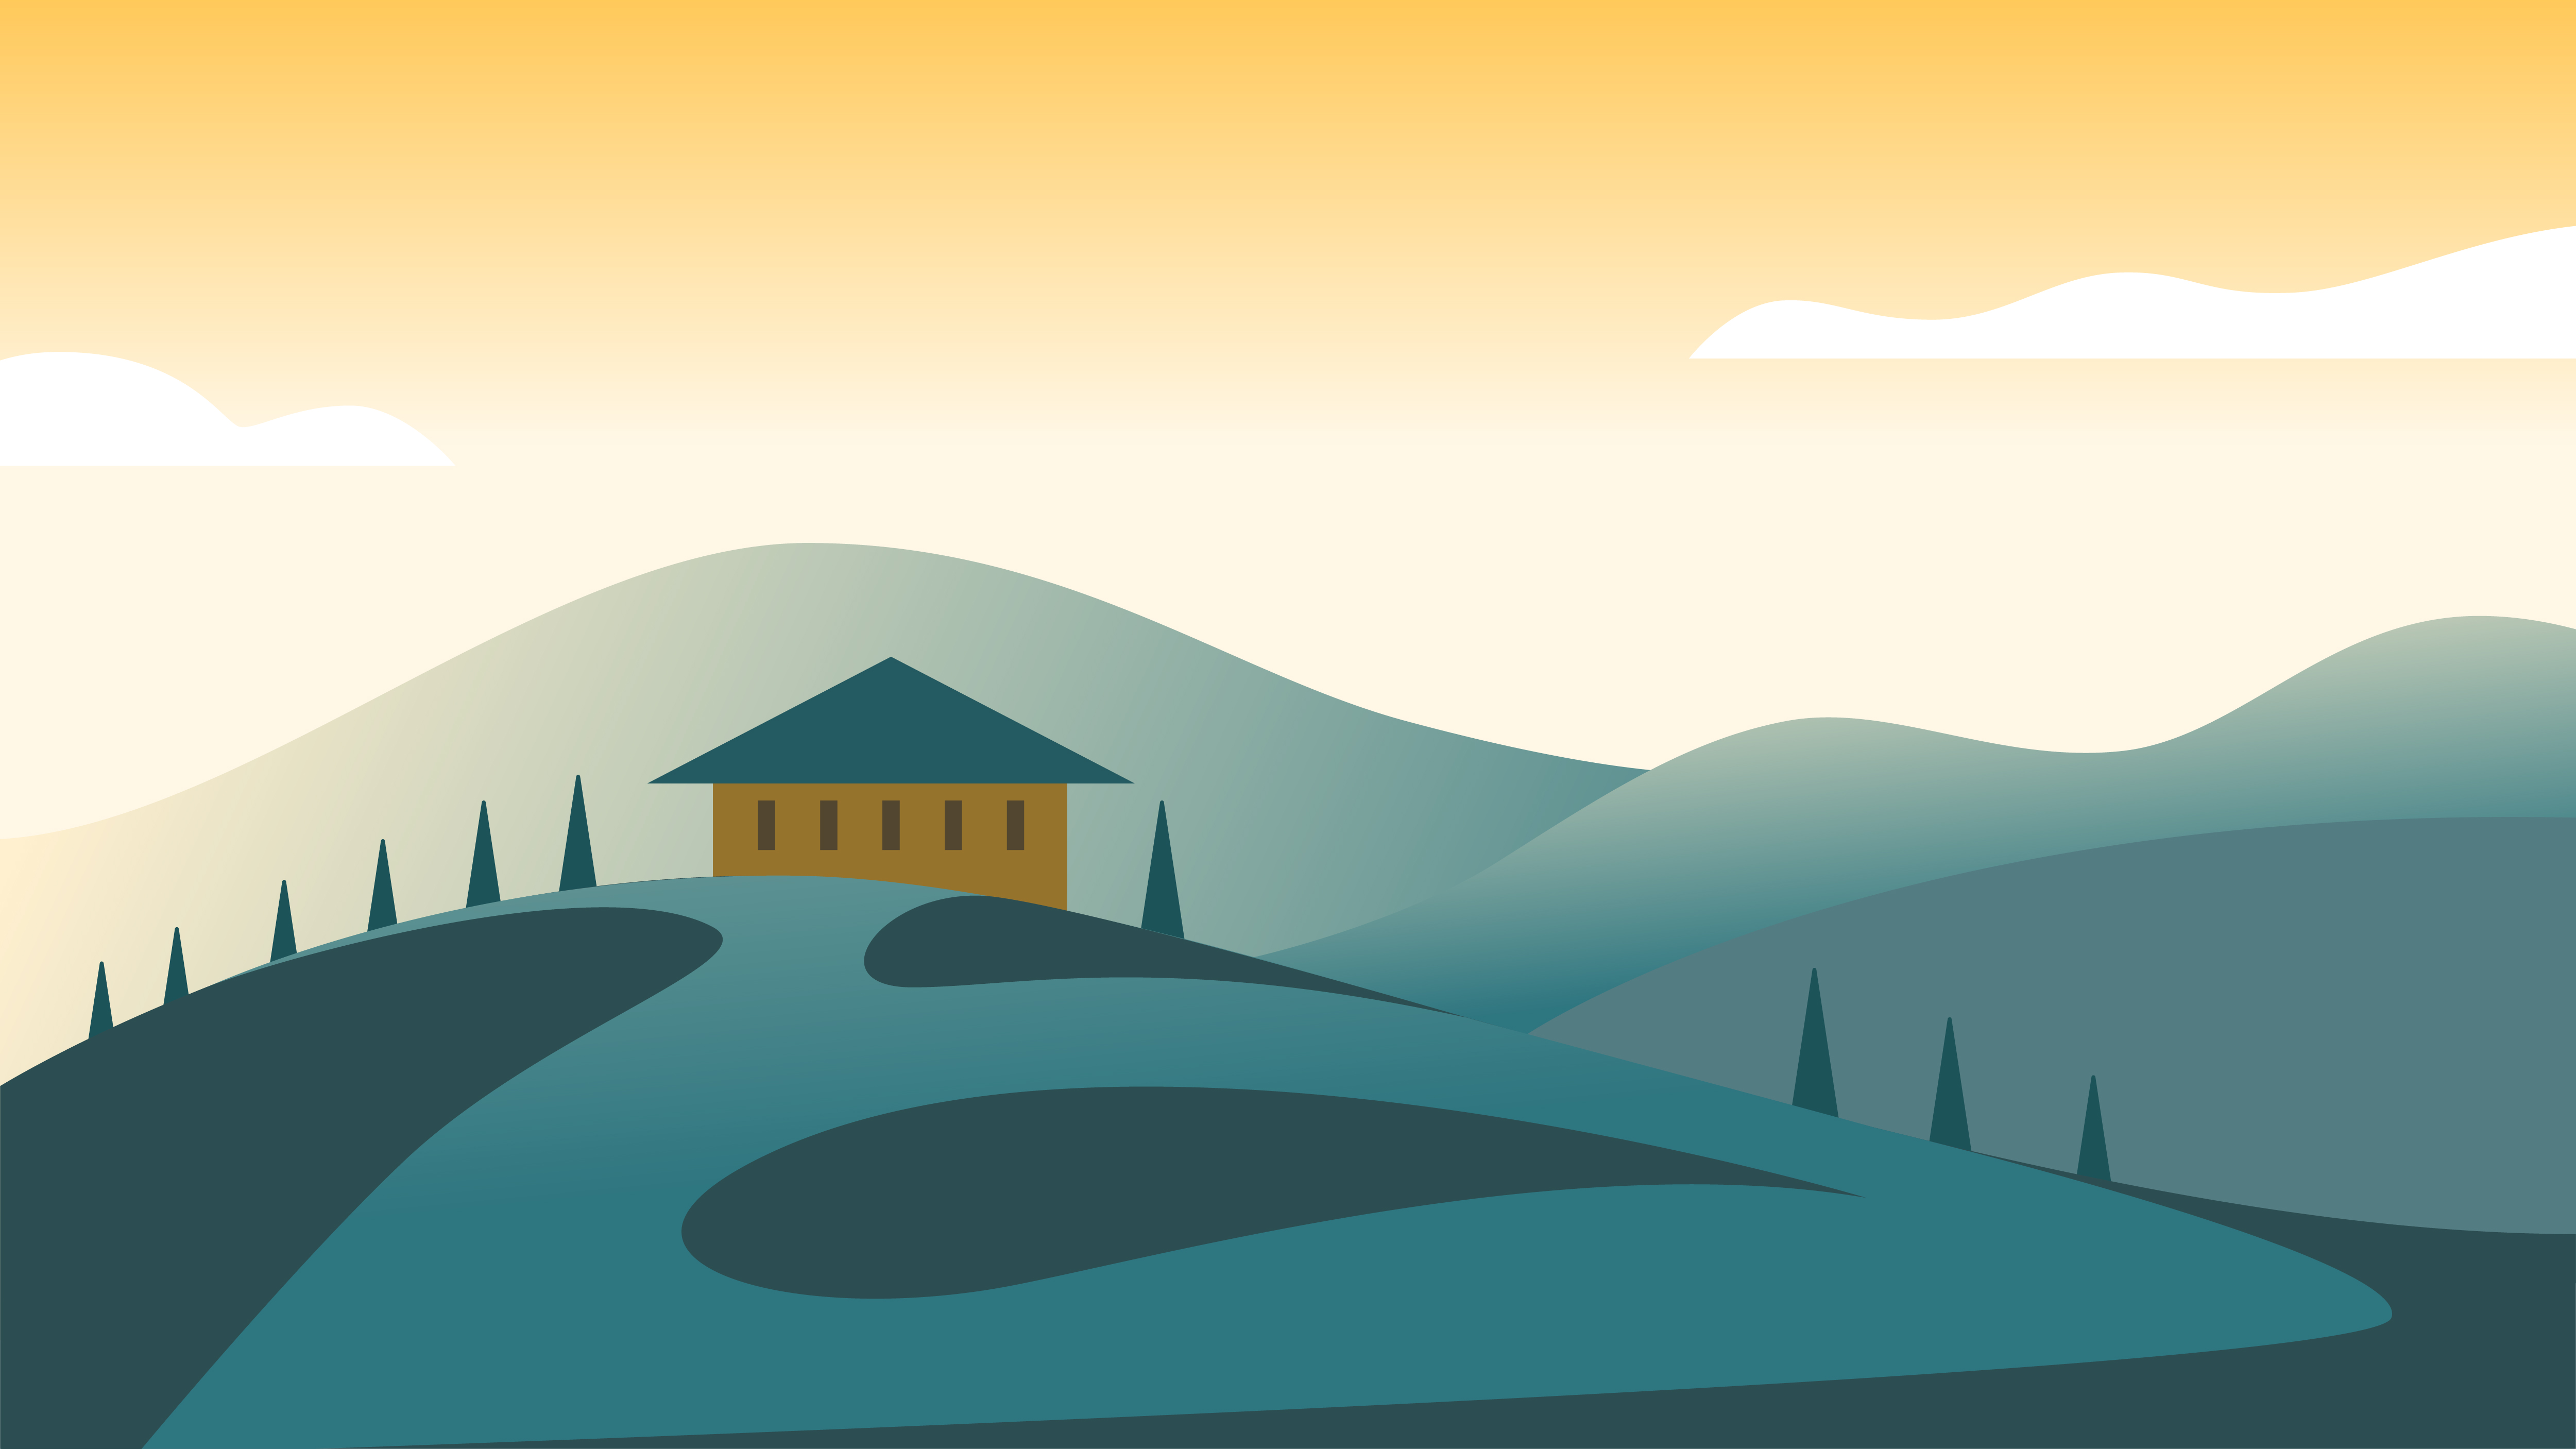 Home in New Zealand on the hills illustration